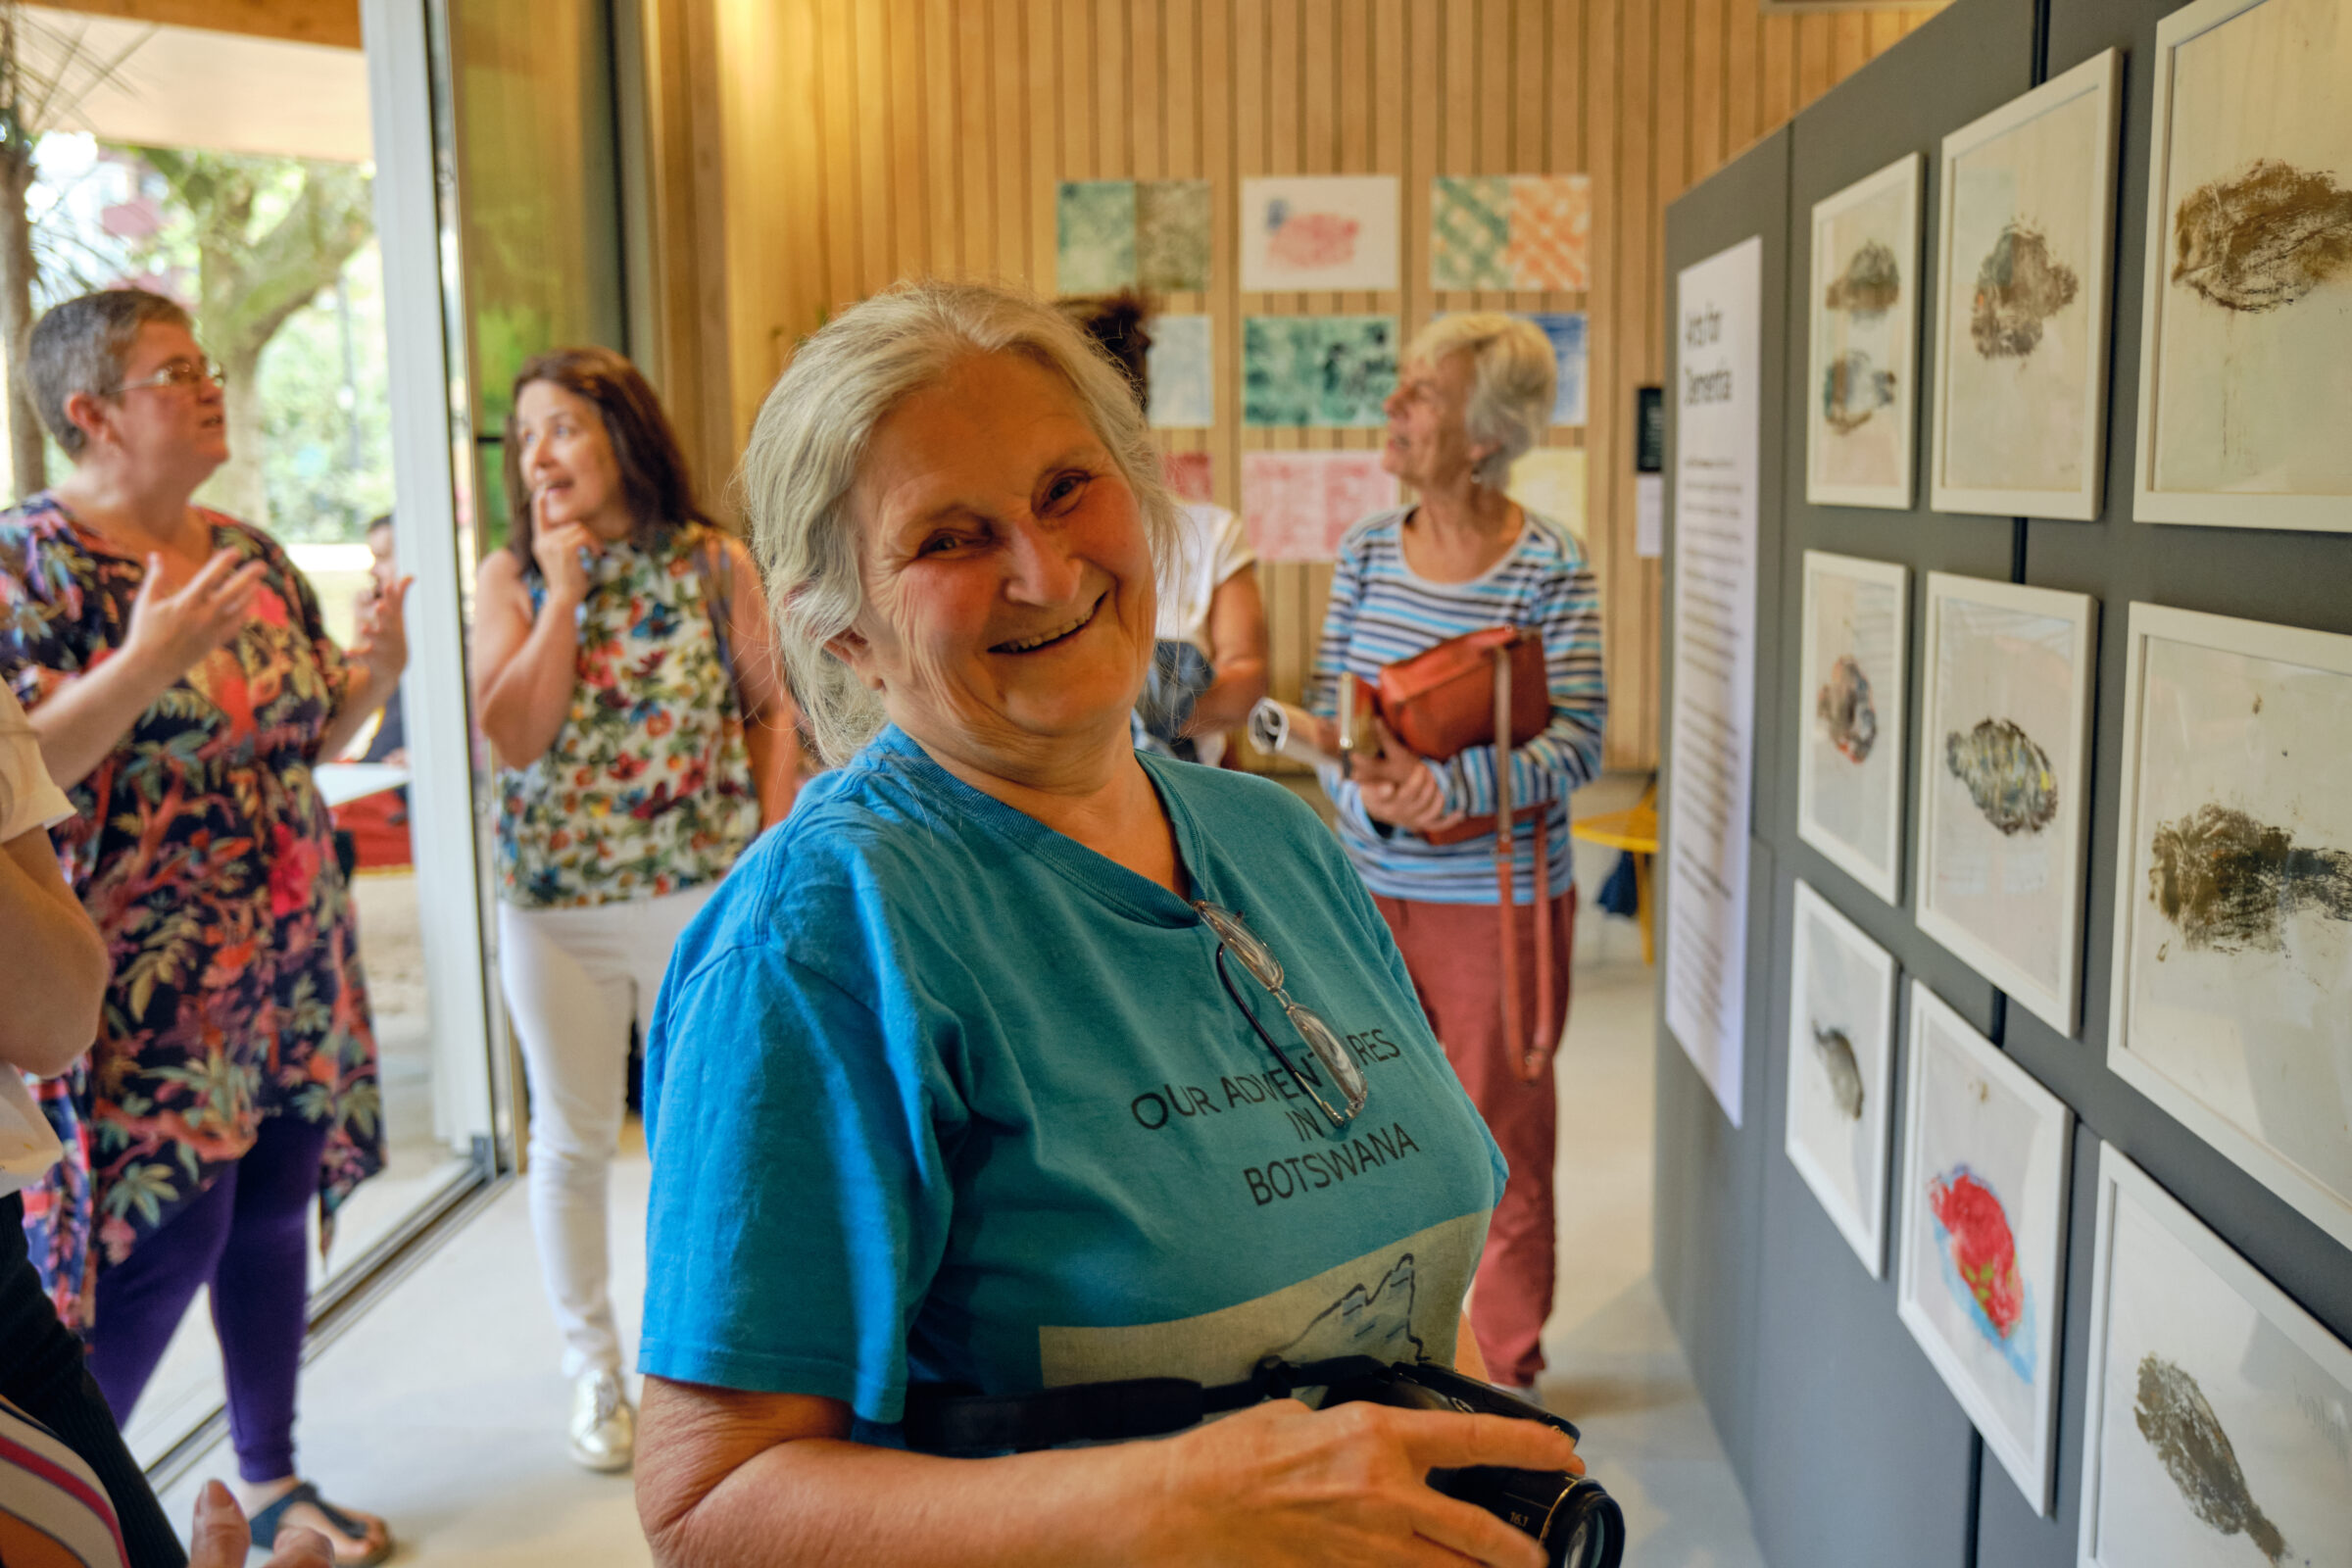 Gill is smiling broadly at the camera, standing beside prints of fish created by her, Dave and other participants in our Treehouse print-making programme. Other people are talking in the background.